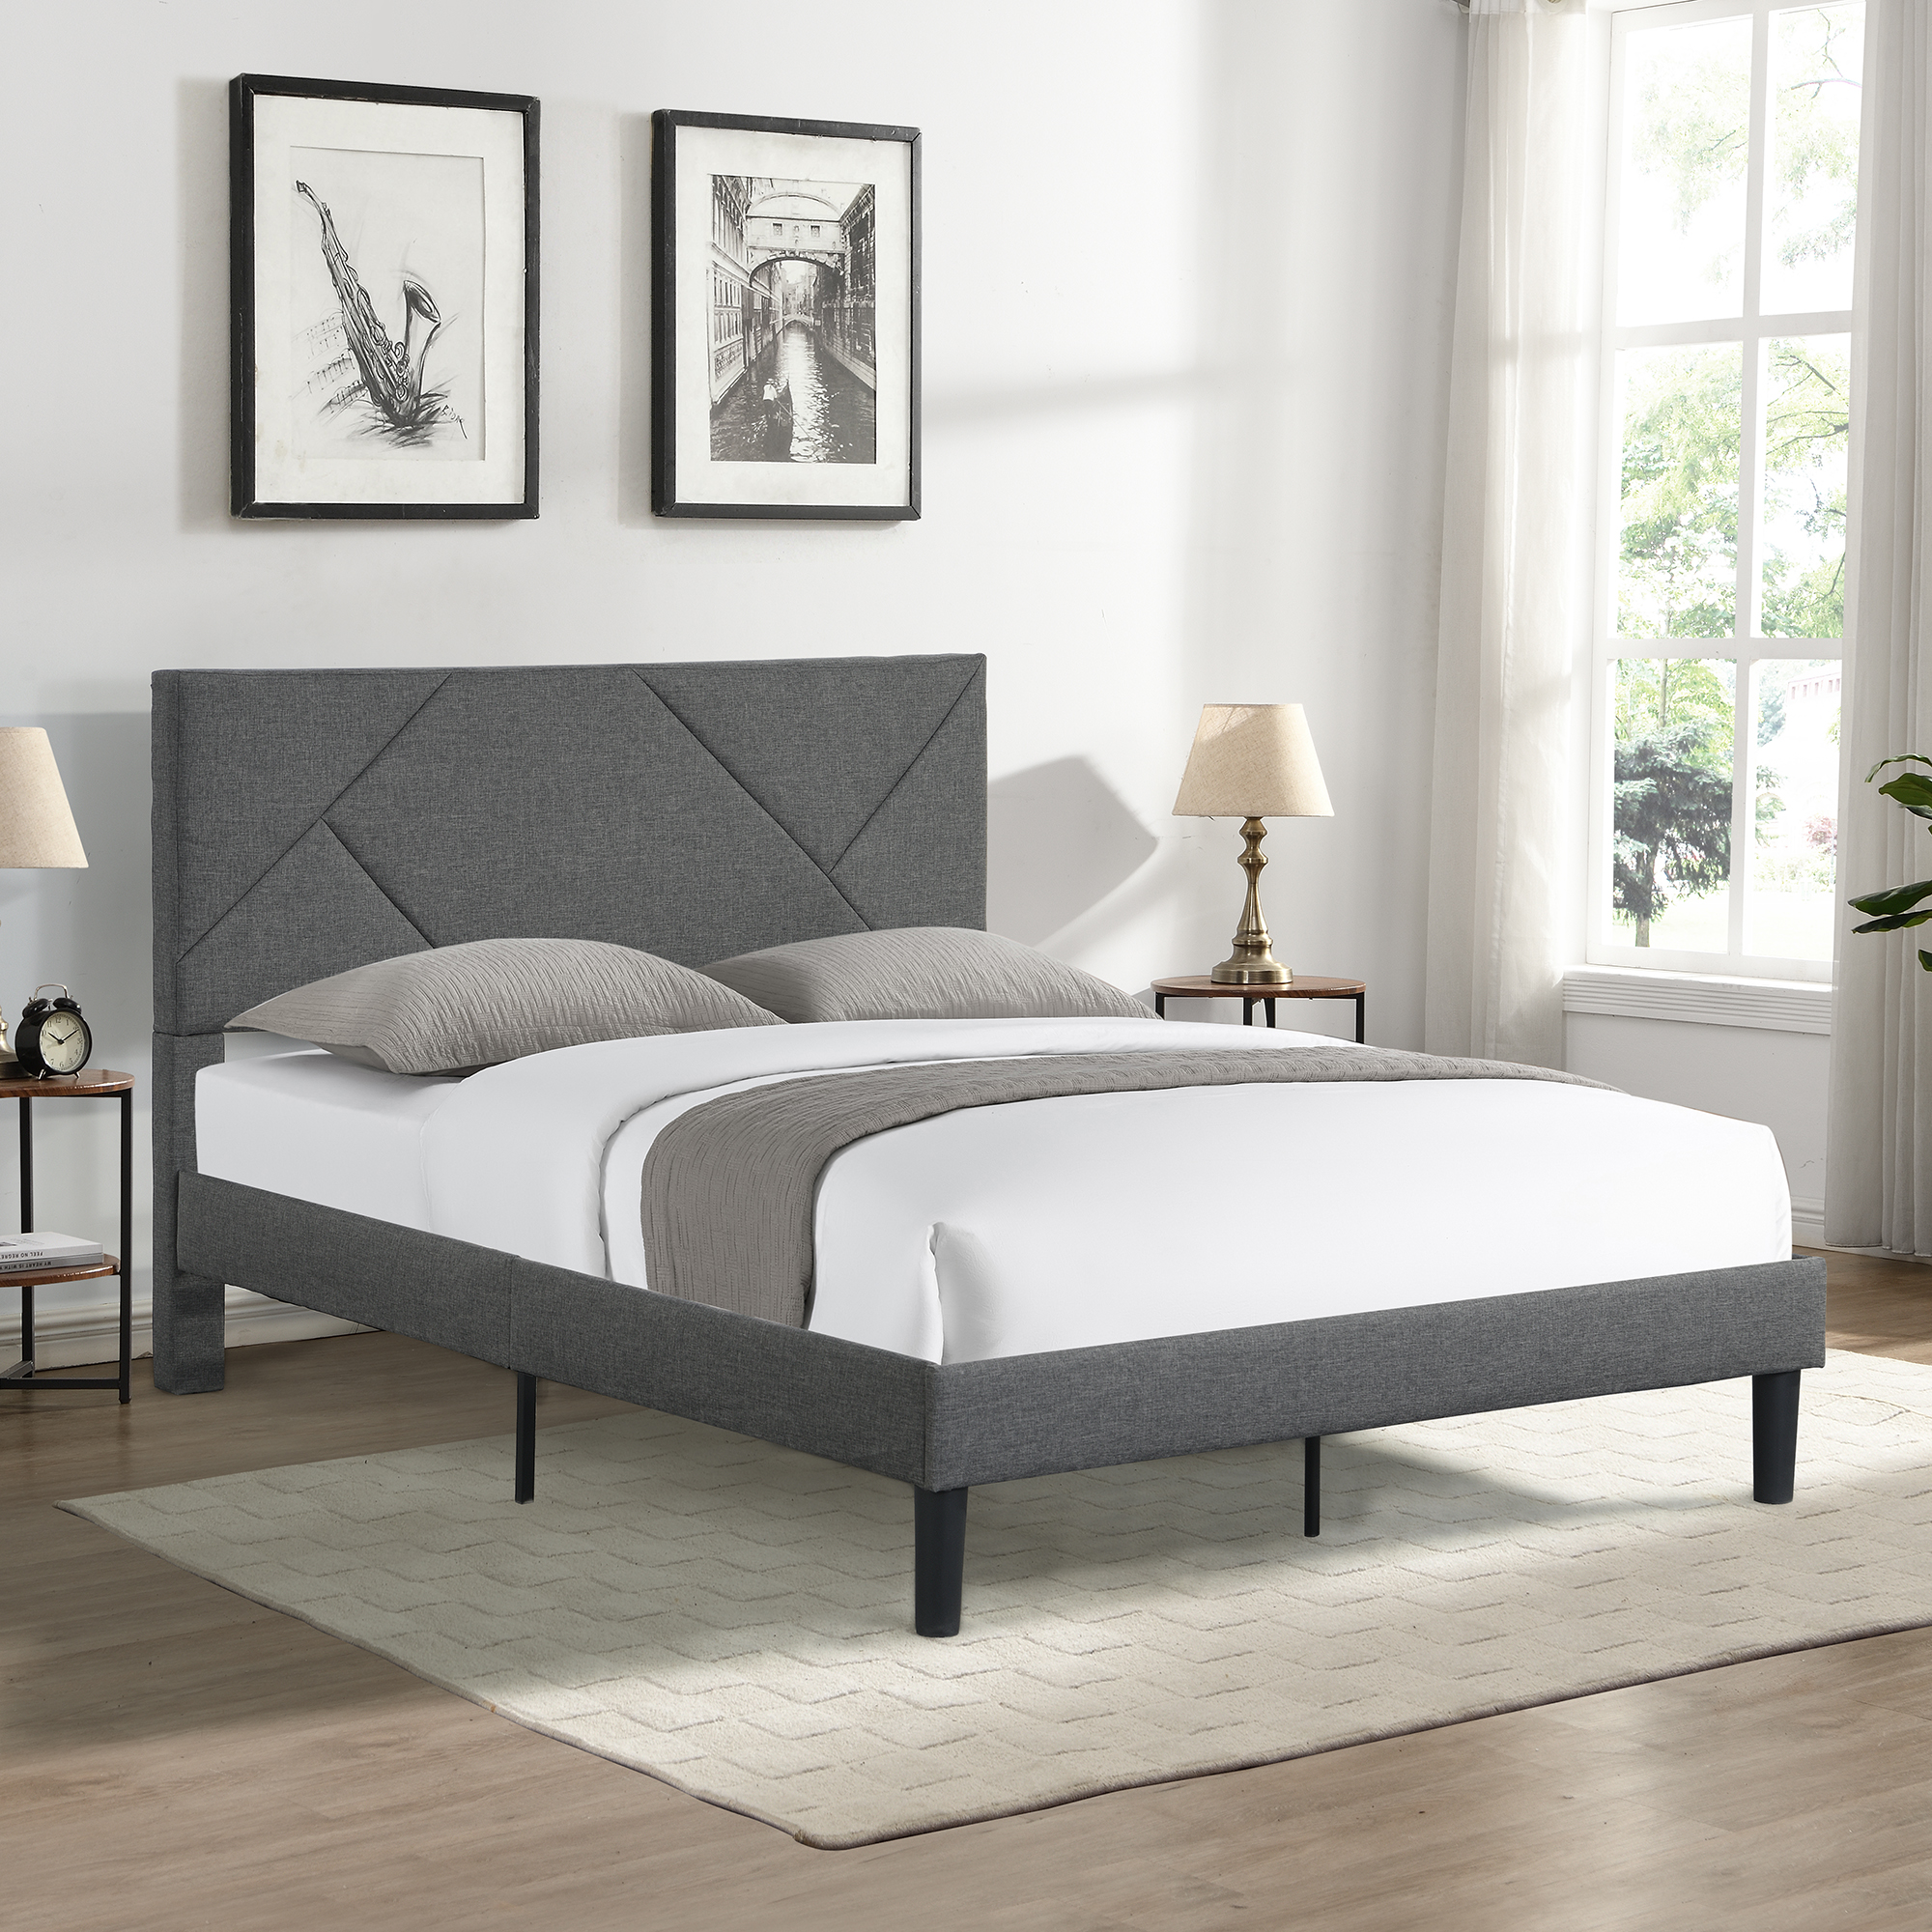 Queen Size Upholstered Platform Bed Frame with Headboard, Strong Wood Slat Support, Mattress Foundation, No Box Spring Needed, Easy Assembly, Gray-CASAINC